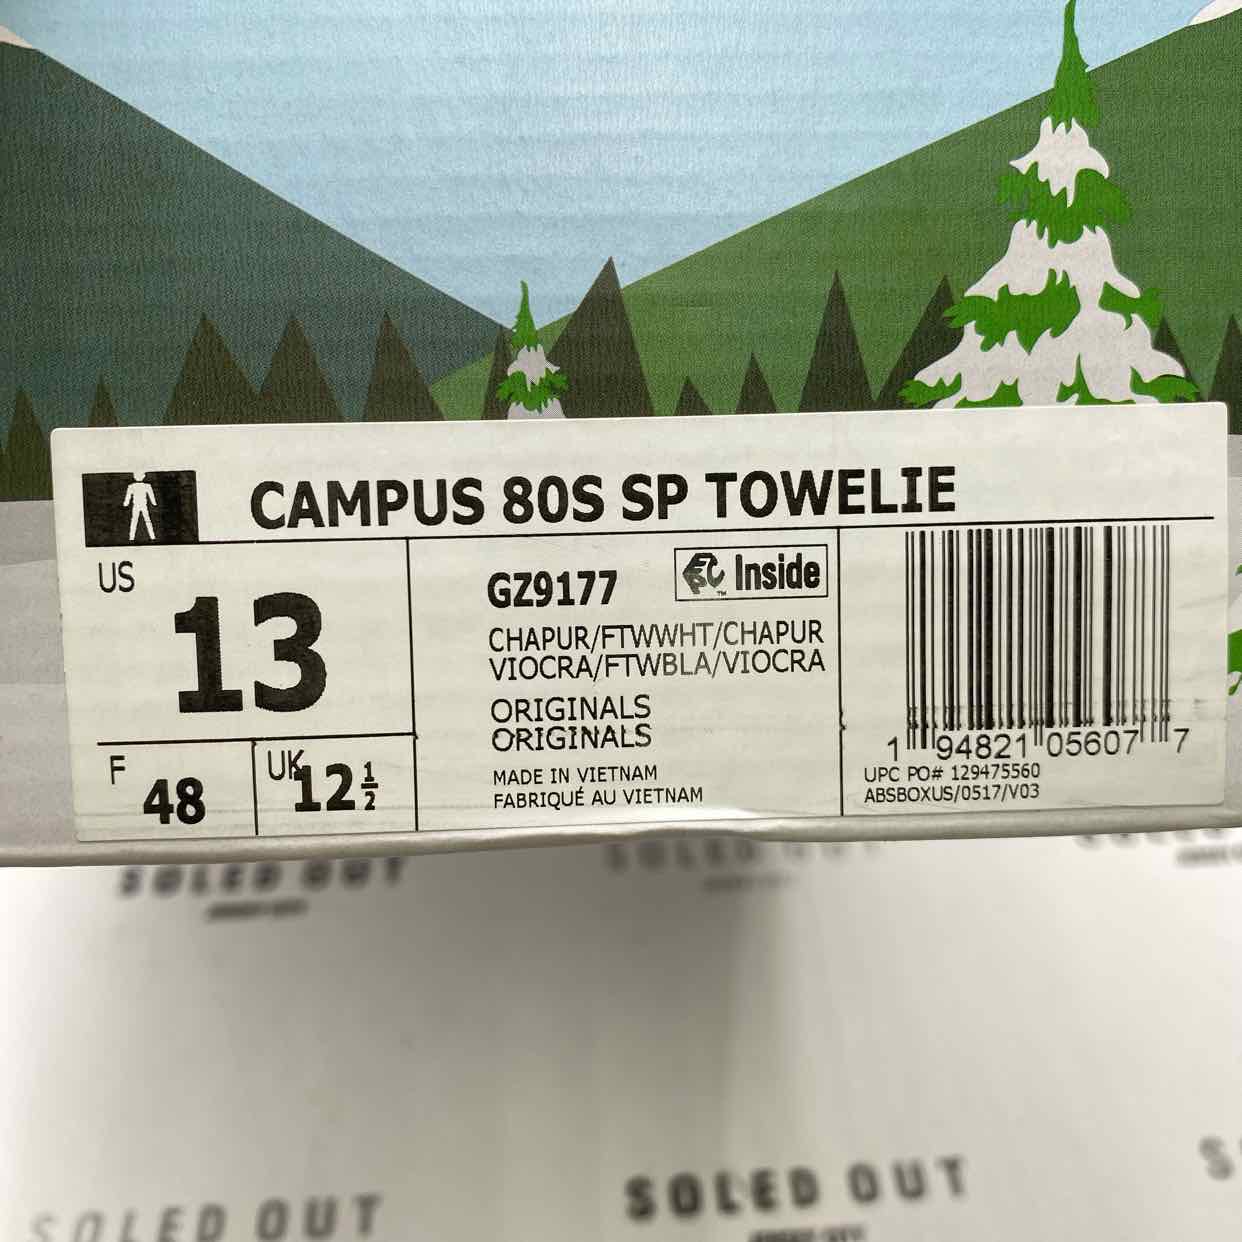 Adidas Campus 80s SP "Towelie" 2021 Used Size 13